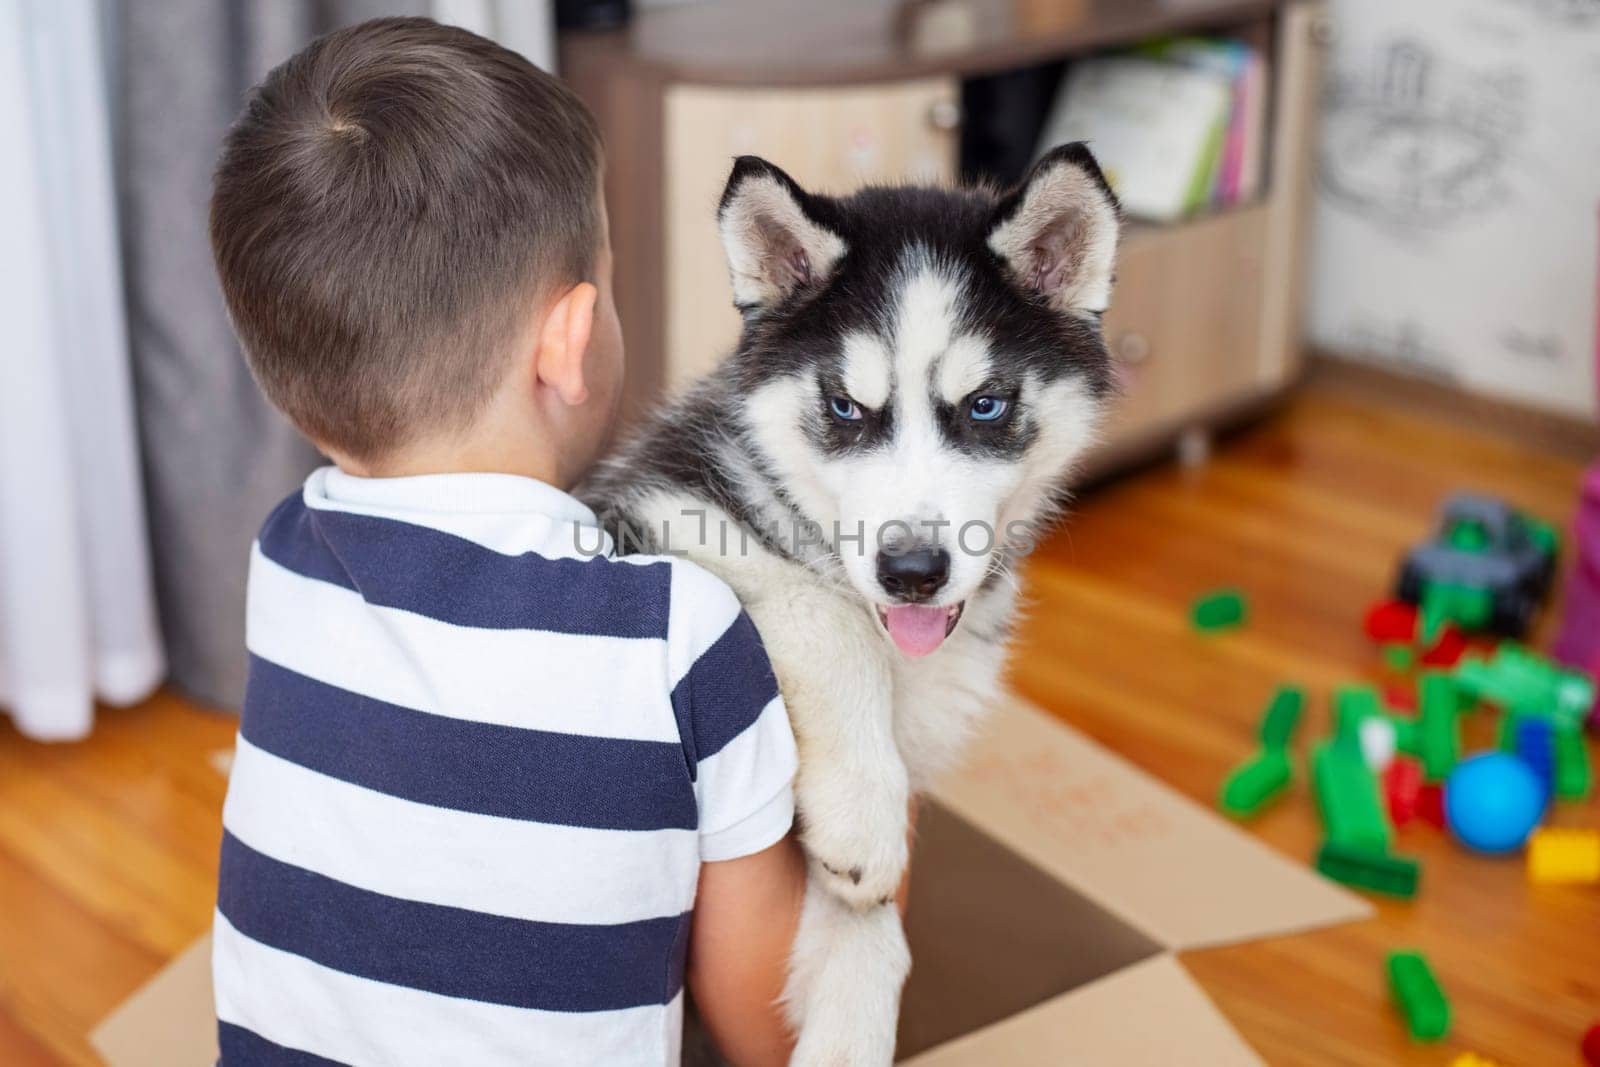 Kid gets out husky puppy from cardboard box at home. Child has birthday present.